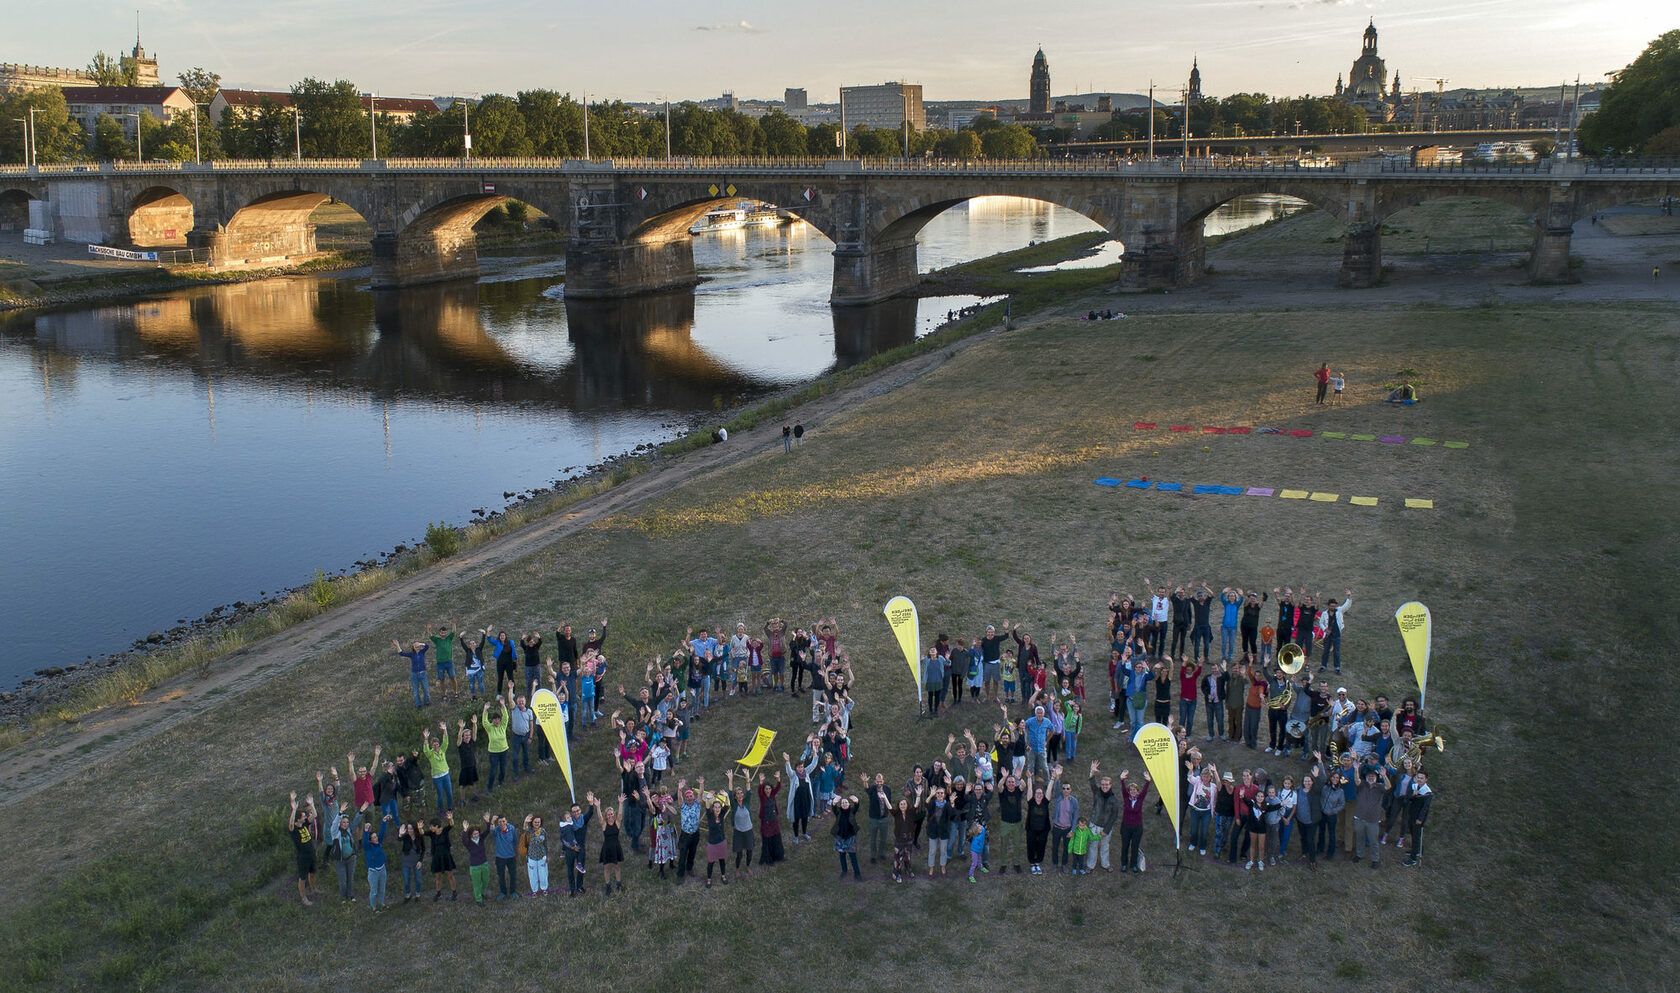 Group photo of numerous citizens forming the number 2025 on Dresden's Elbe river bank.